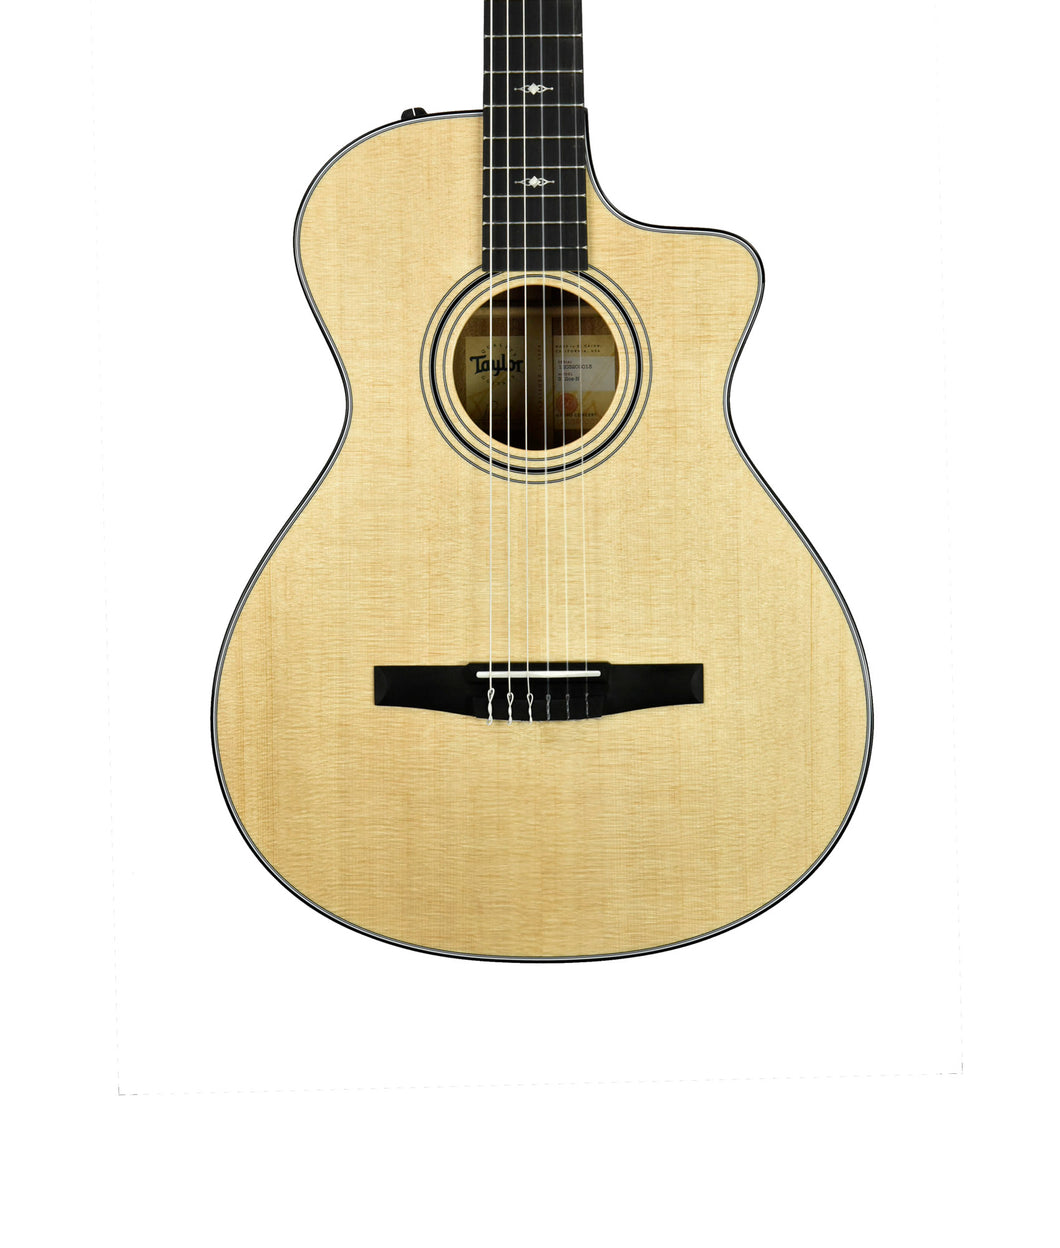 Taylor 312ce-N Acoustic-Electric Guitar in Natural 1203203013 - The Music Gallery